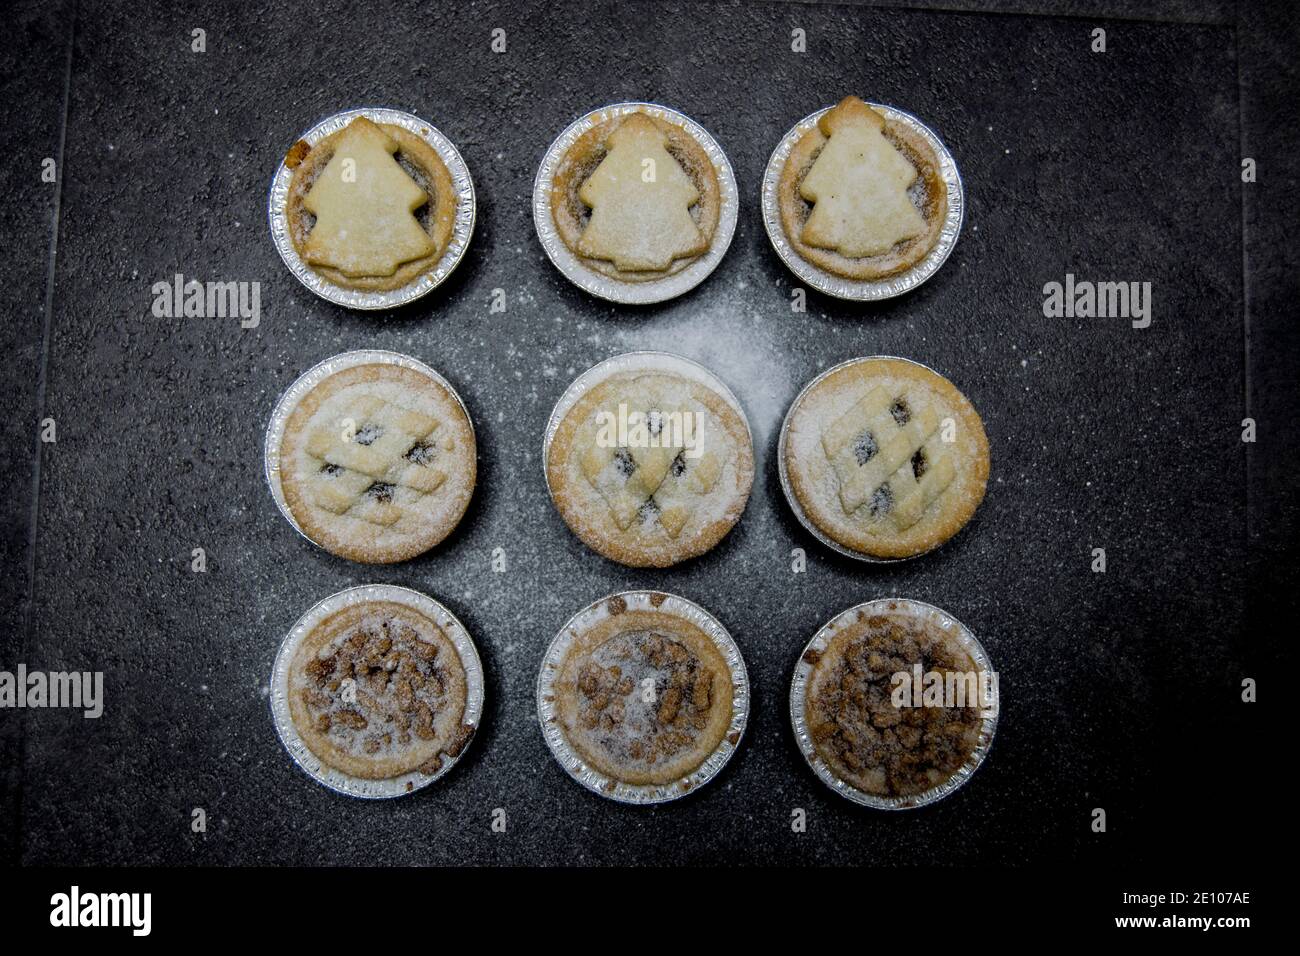 Nine Christmas mince pies on a dark background Stock Photo